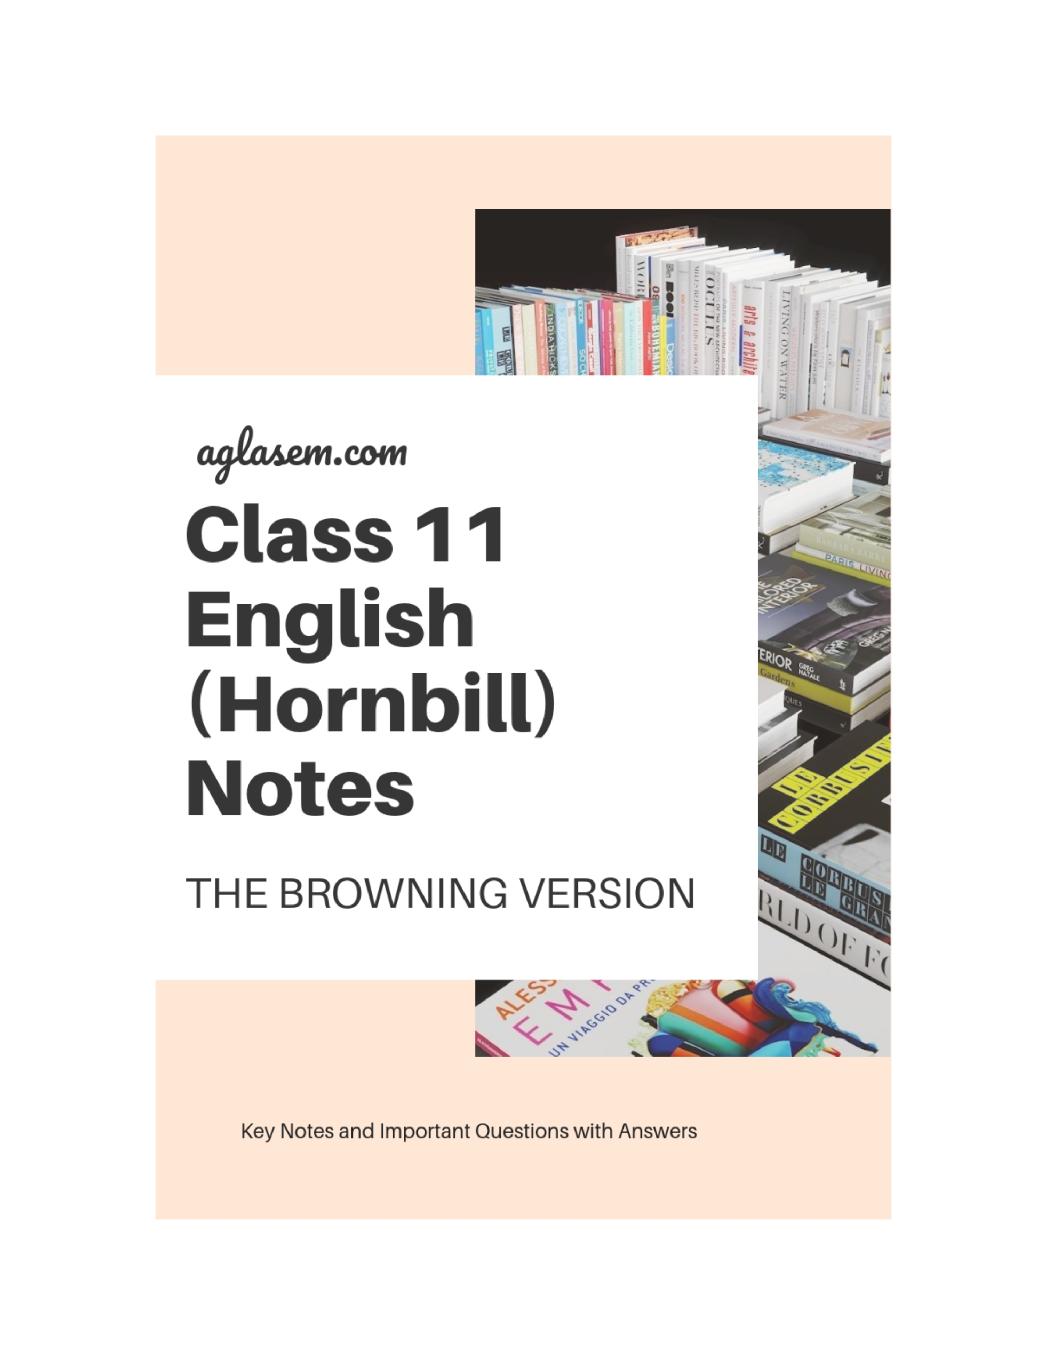 Class 11 English Hornbill Notes For The Browning Version - Page 1